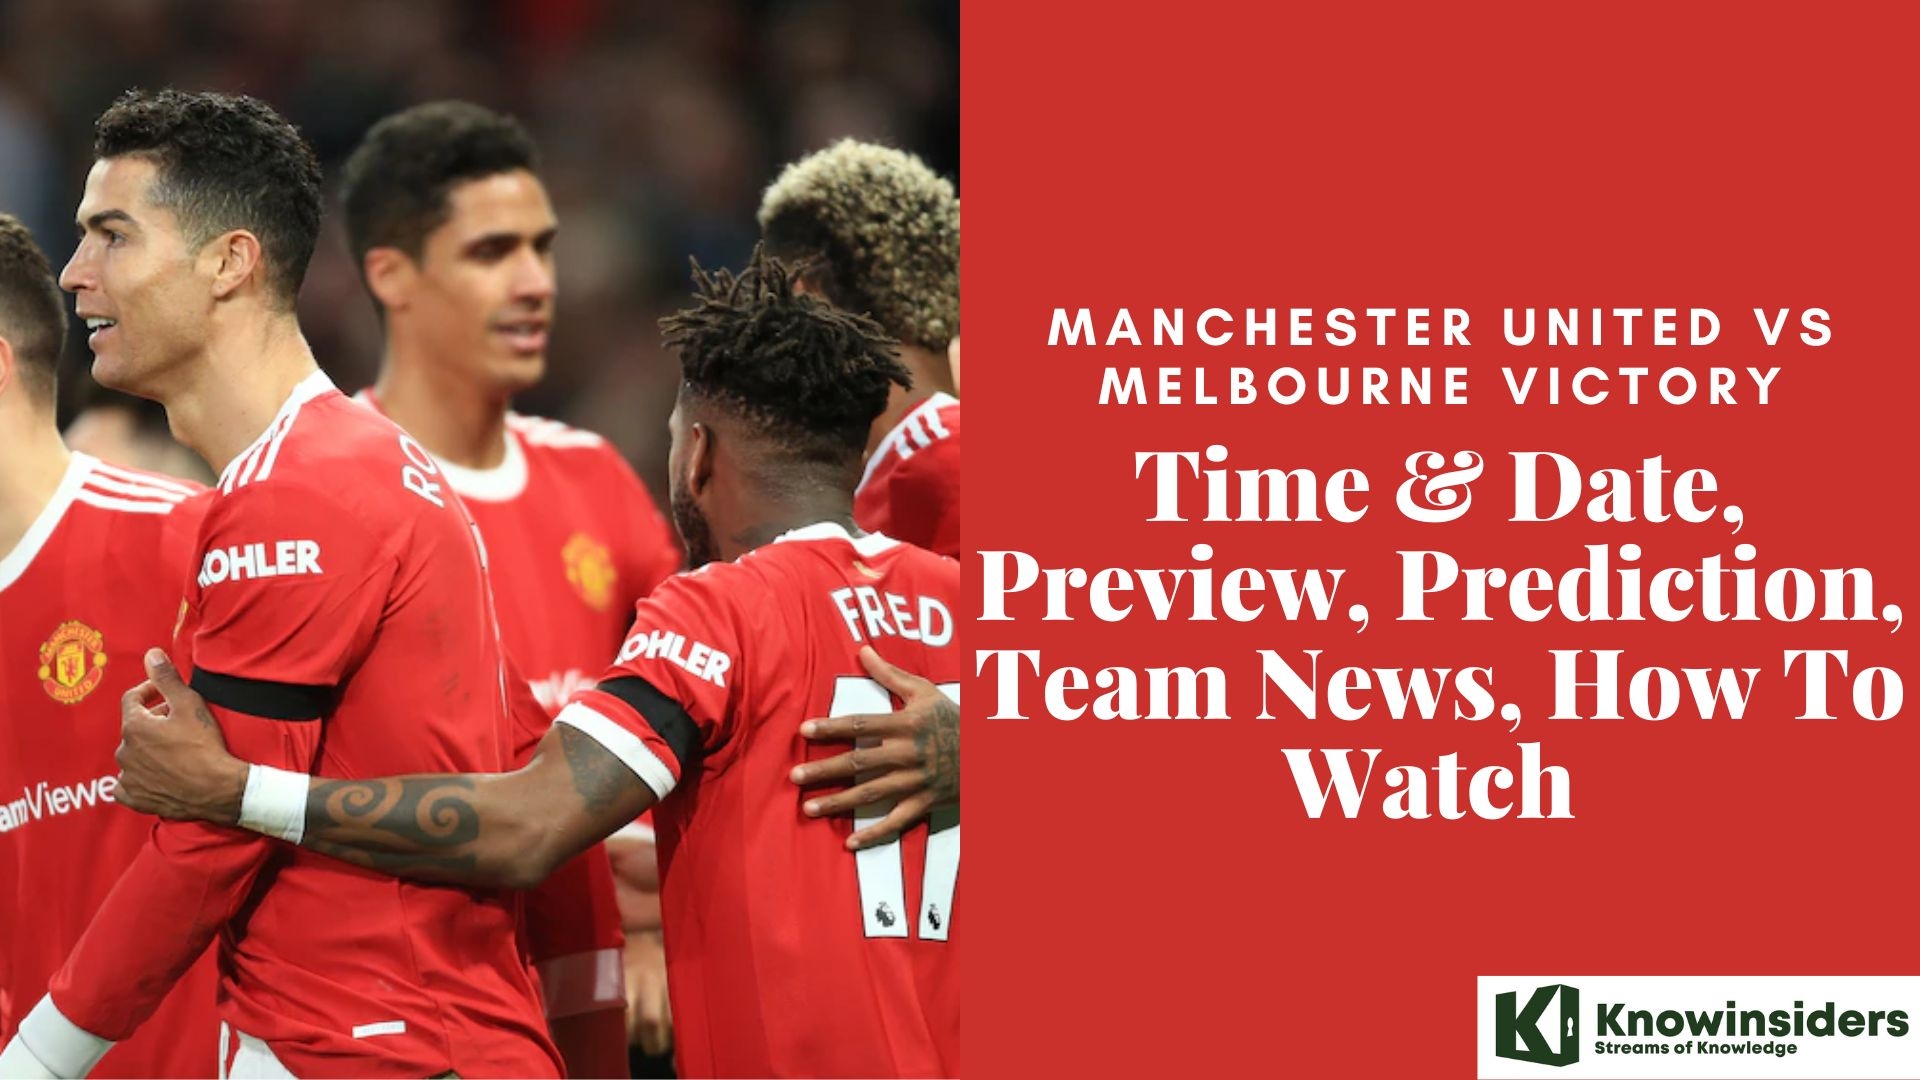 Manchester United vs Melbourne Victory: Time & Date, Preview, Prediction, Team News, How To Watch 